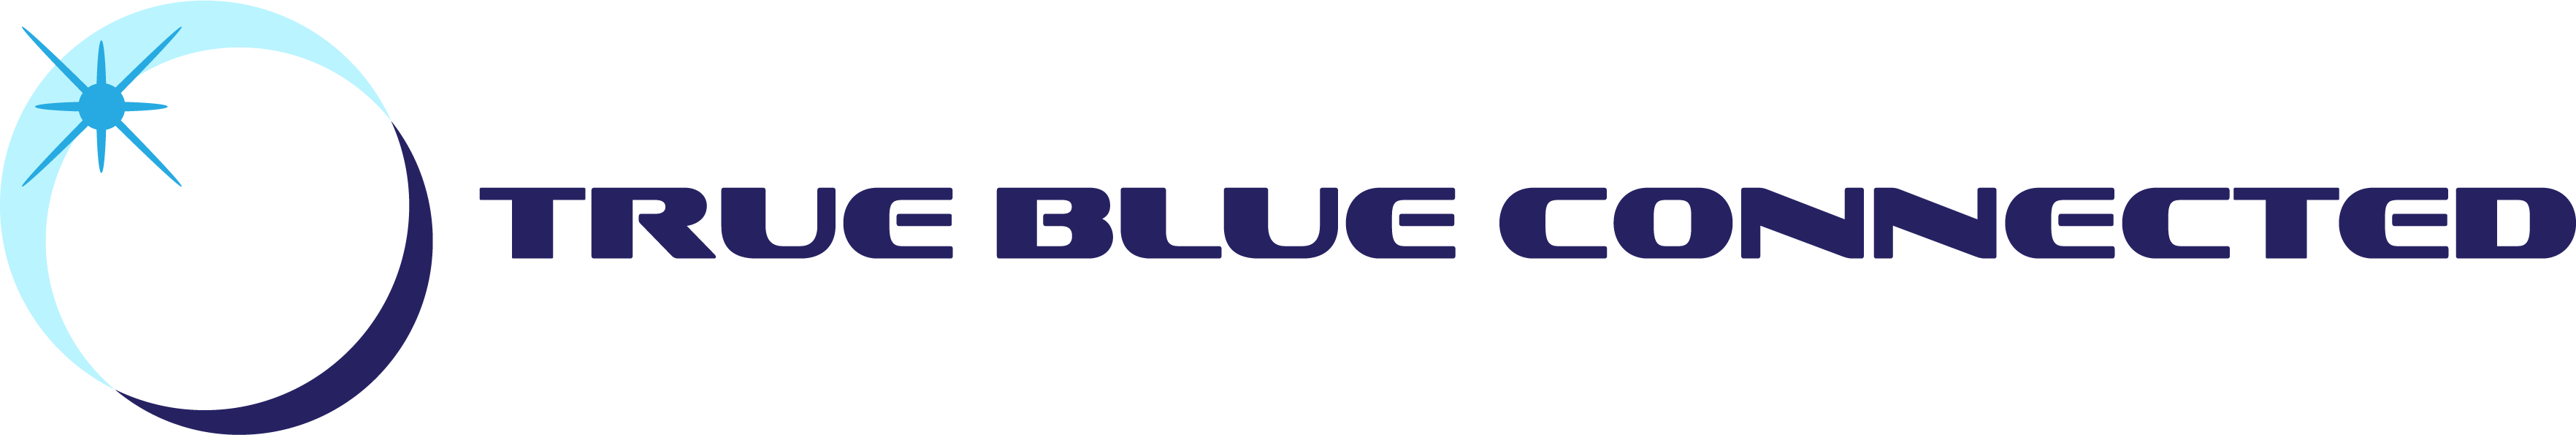 True Blue Connected